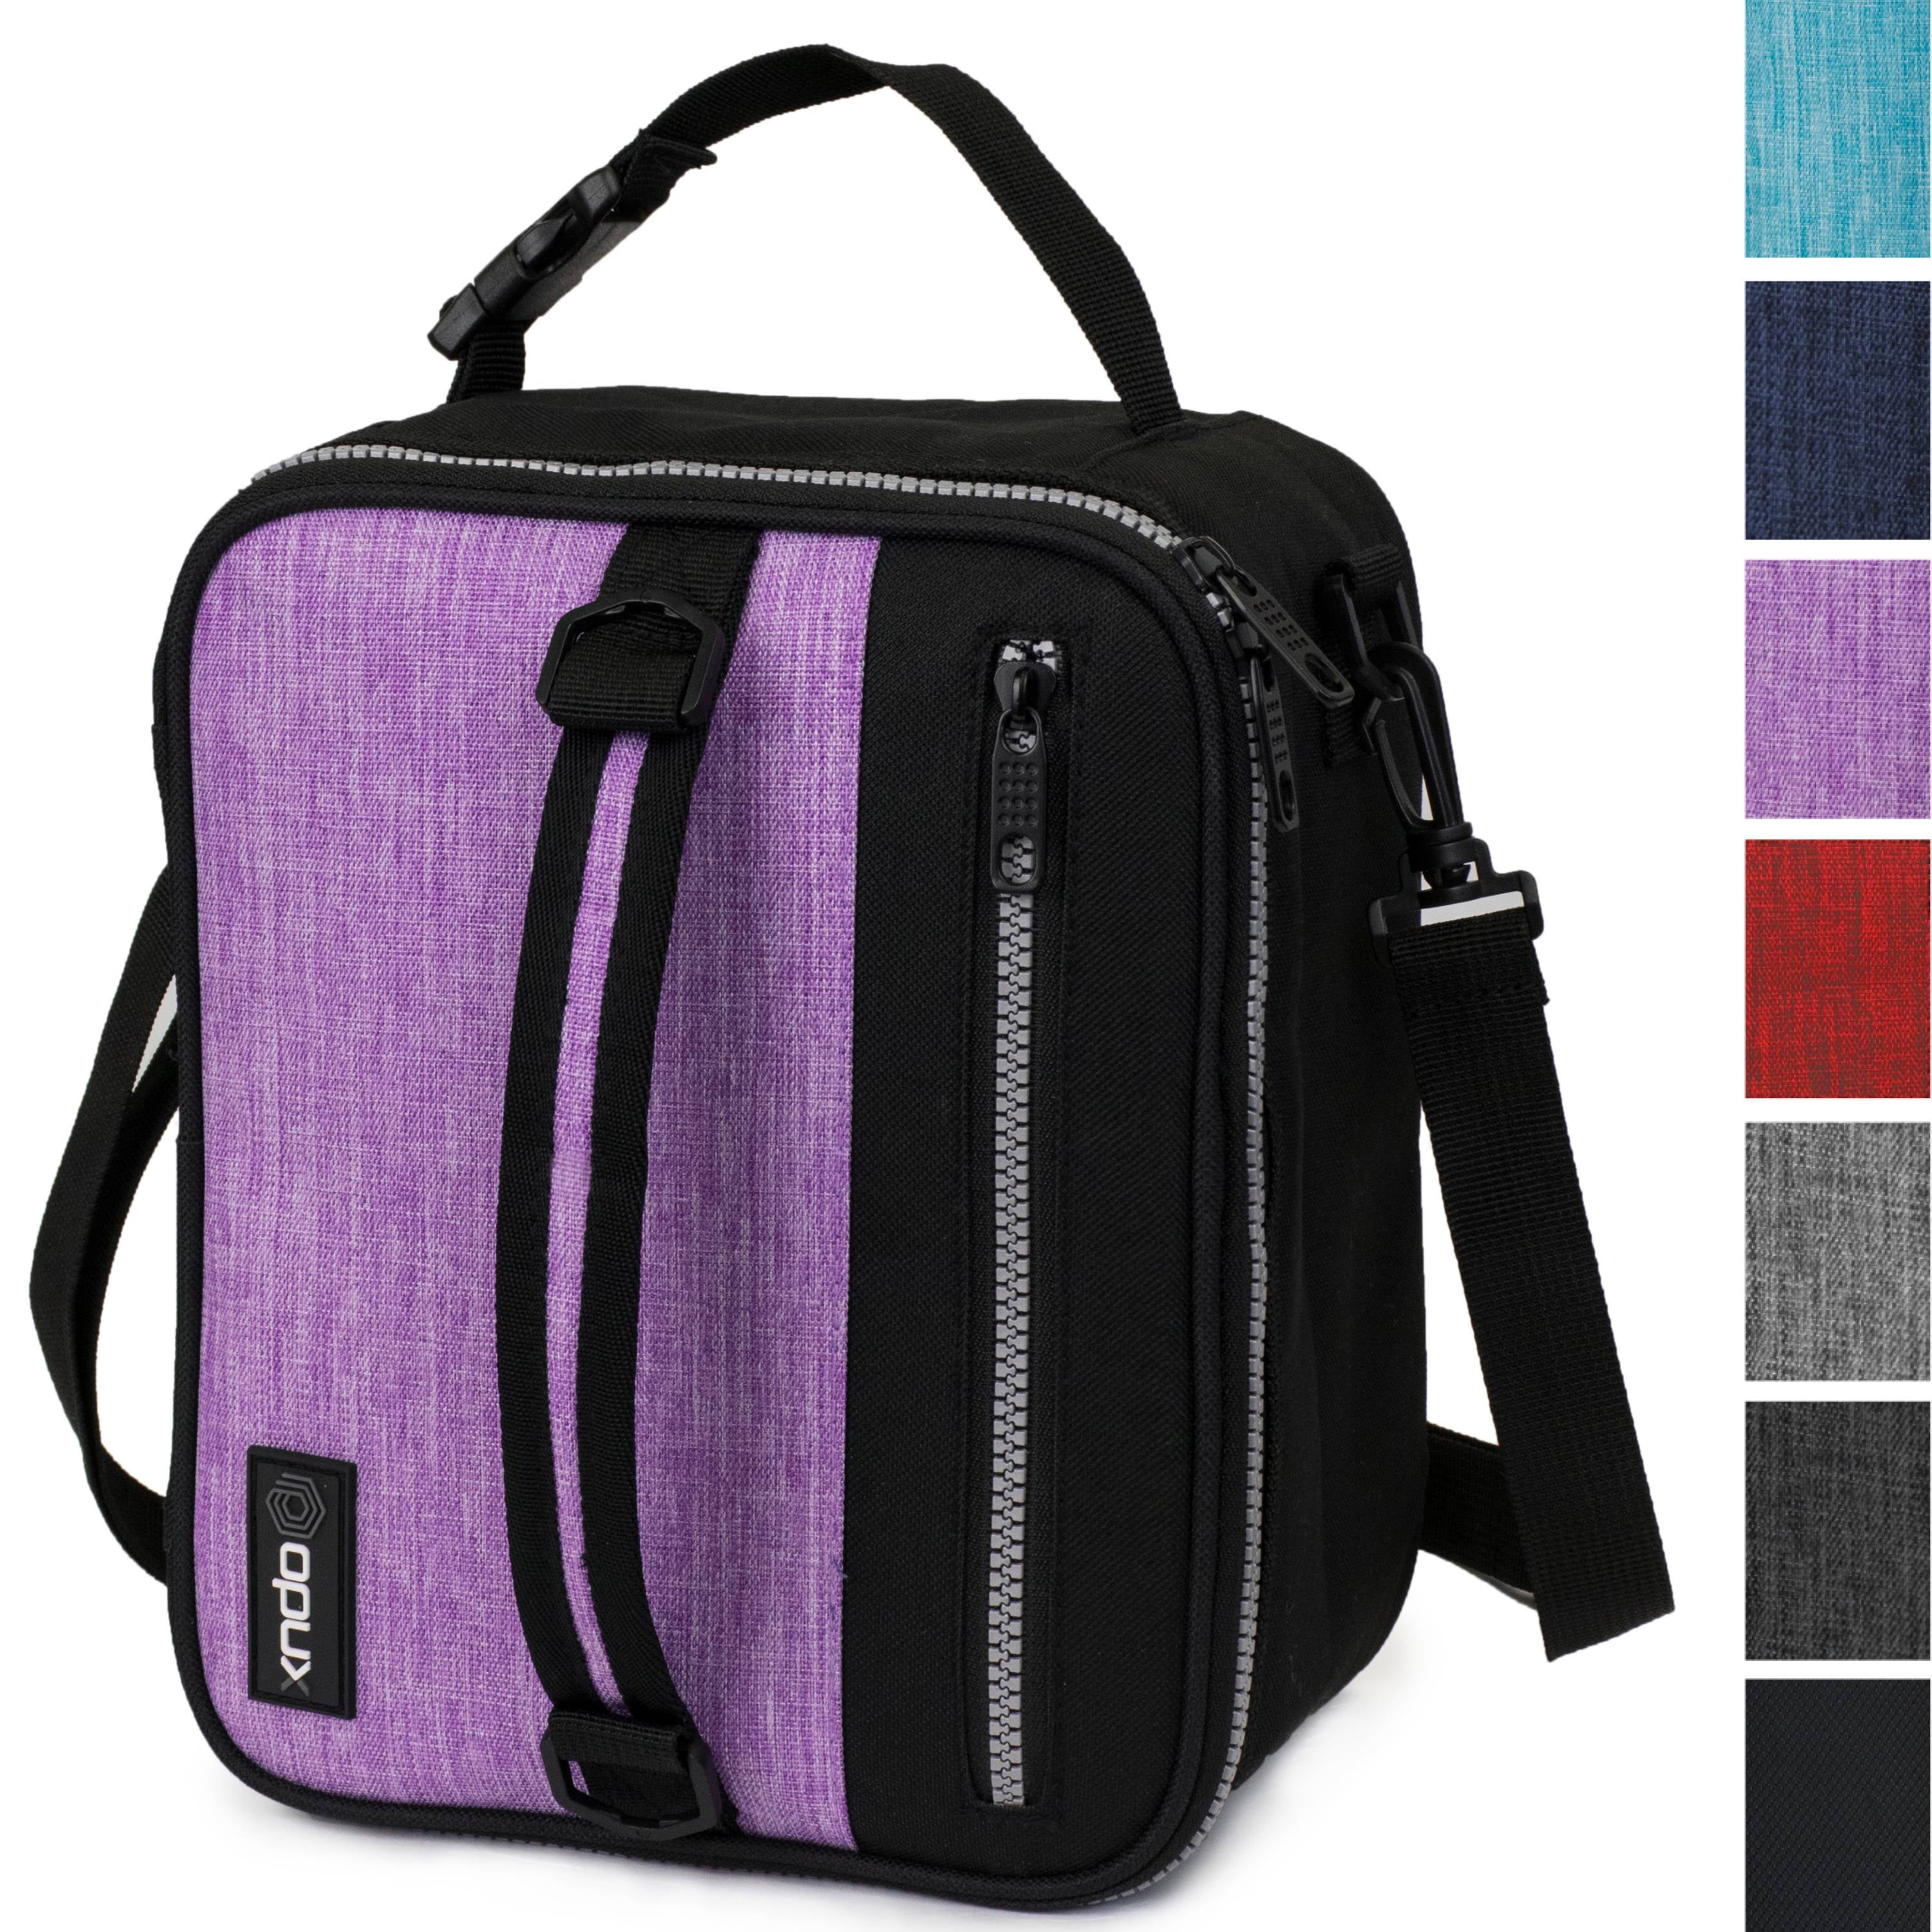 Details about   Large Insulated Lunch Bag For Men And Women With Room For More Meals And Snacks.